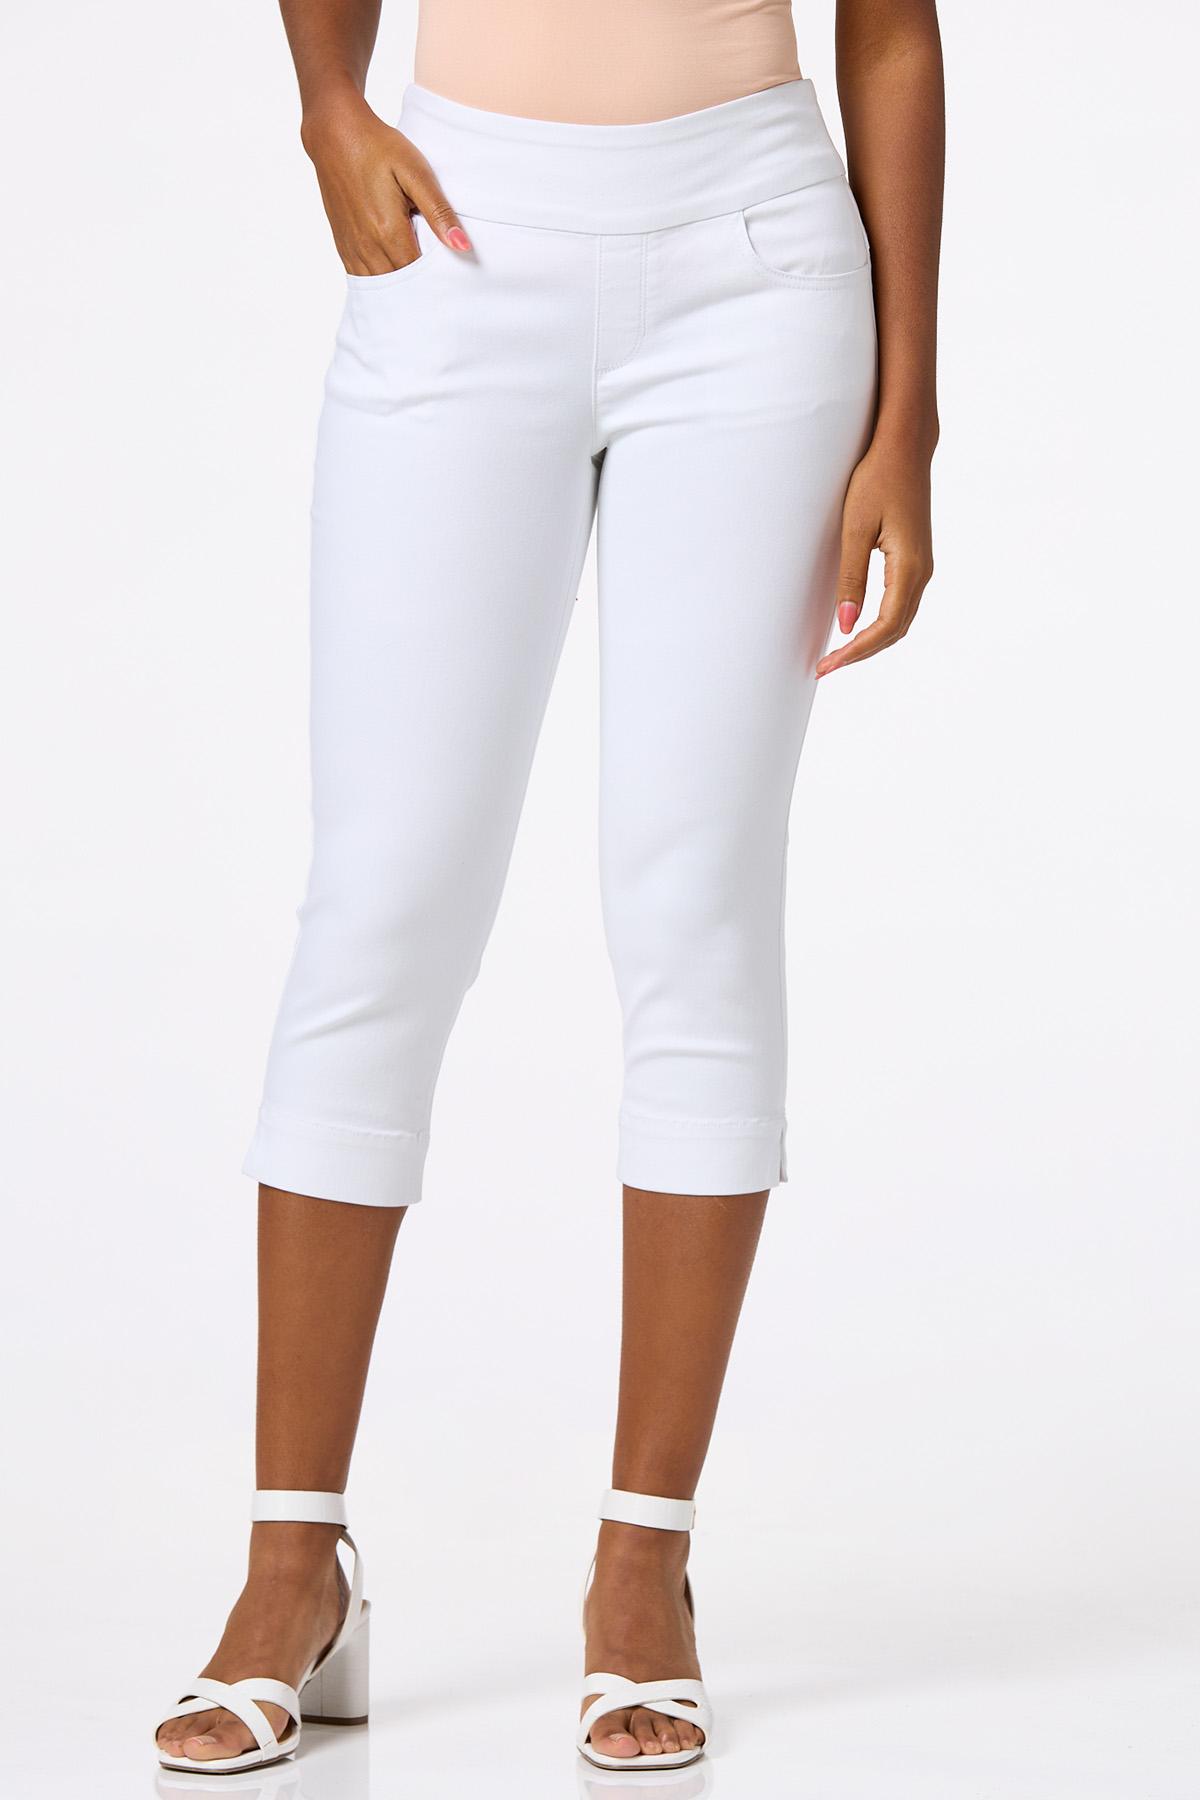 Cato Fashions  Cato Cropped High Rise Jeans